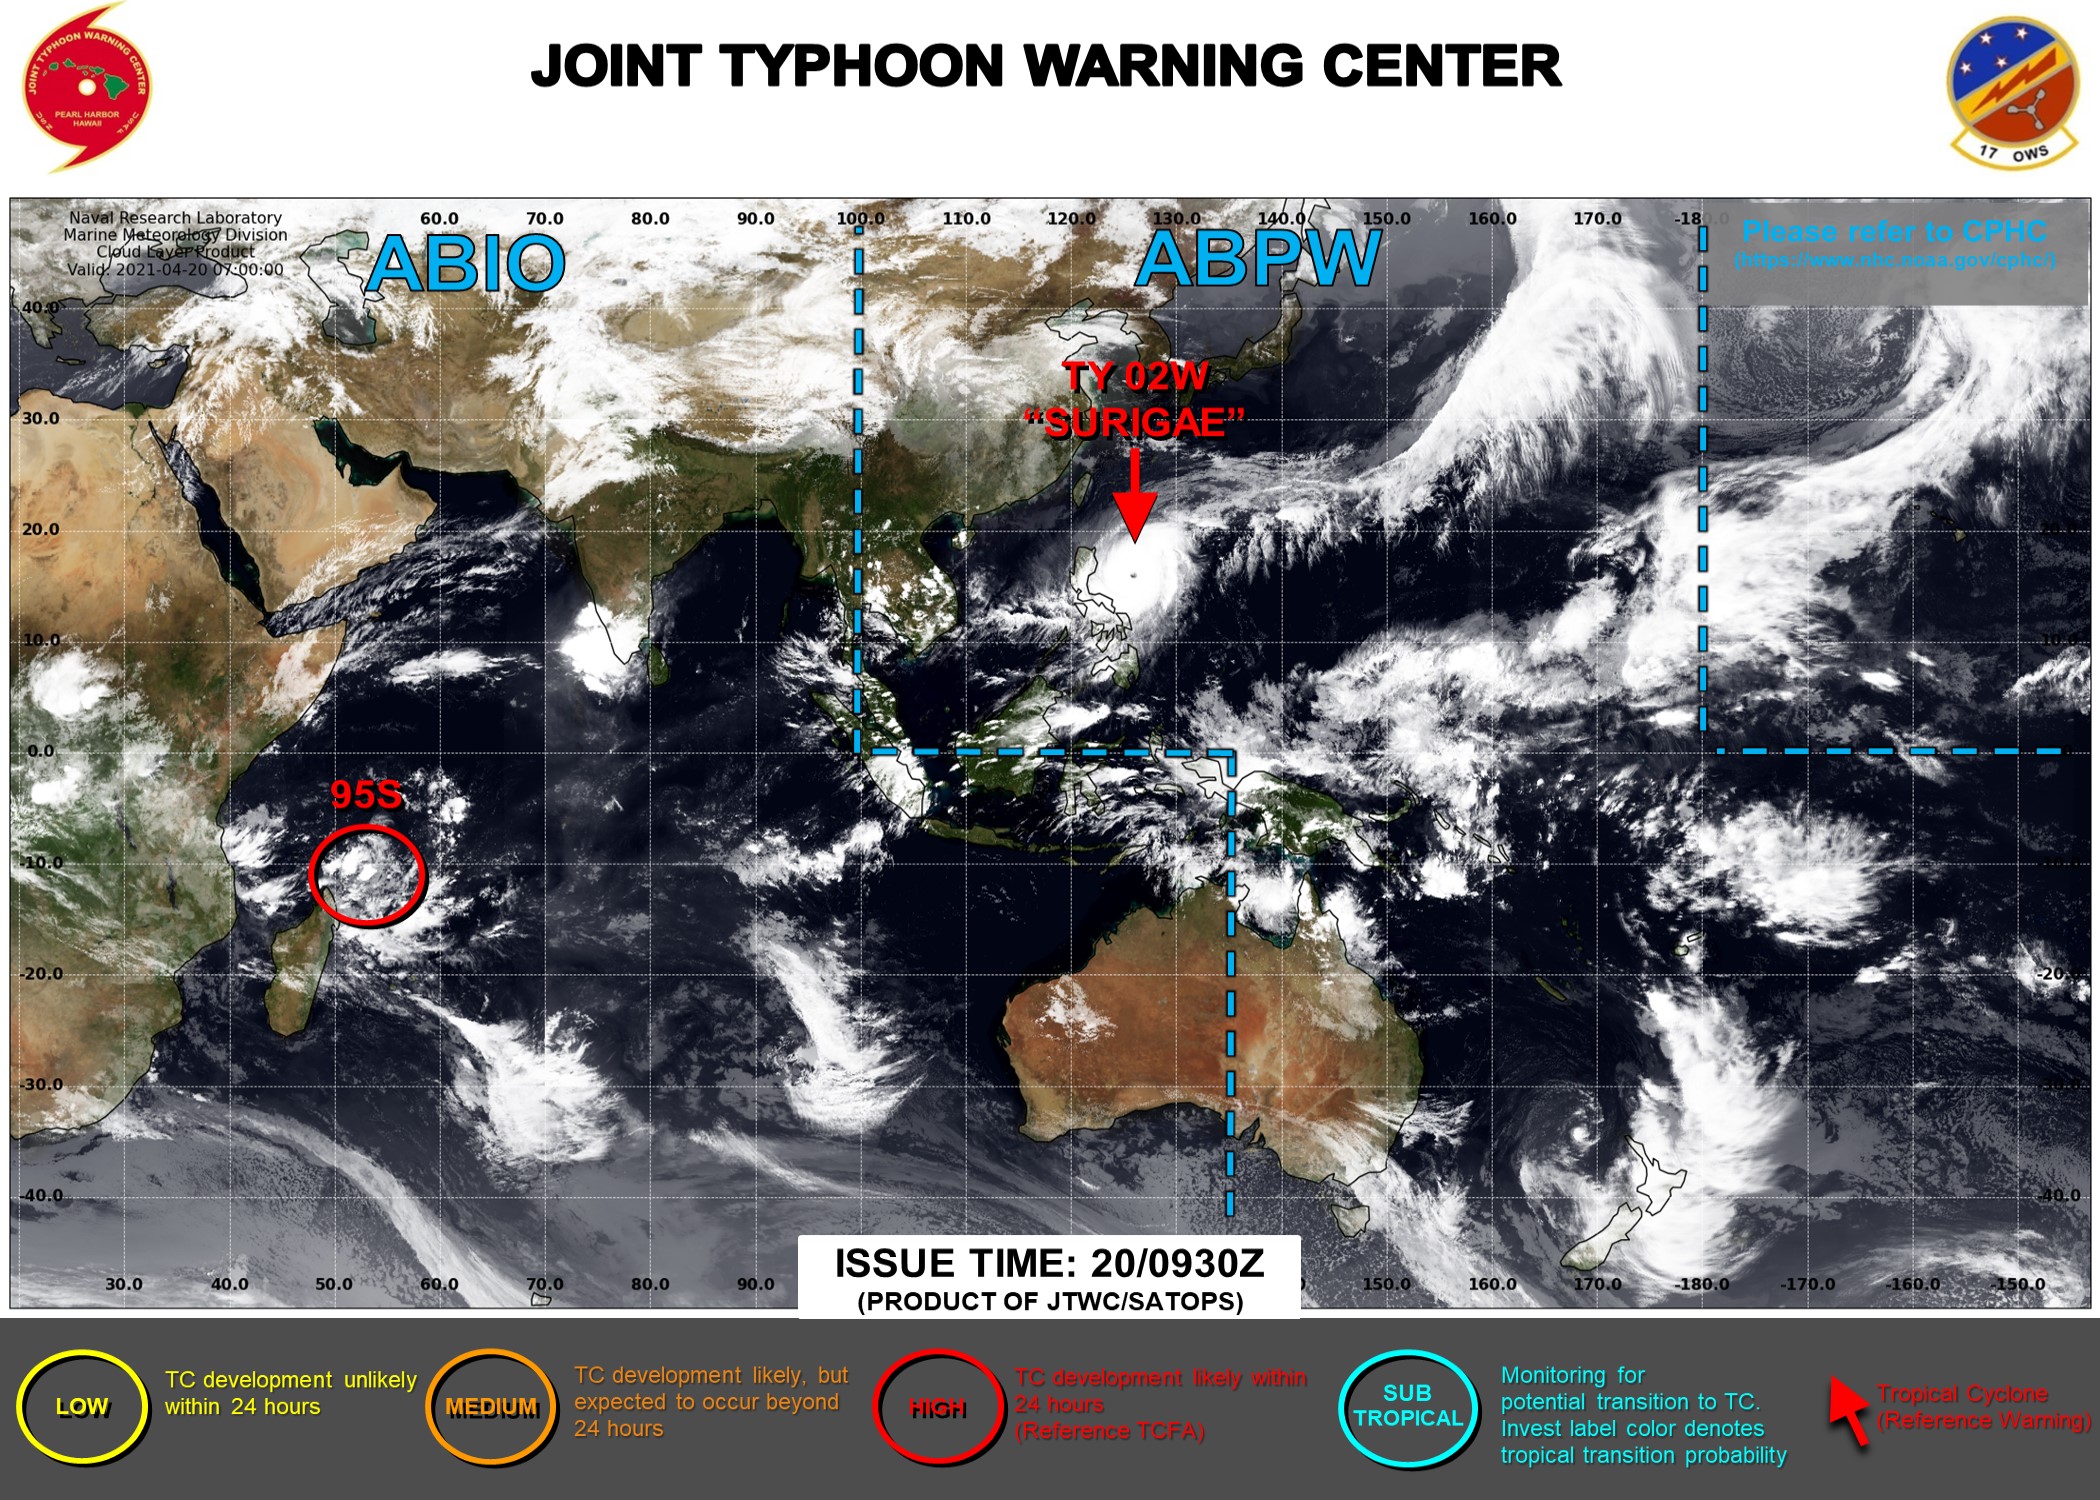 20/0930UTC. THE JTWC IS ISSUING 6HOURLY WARNINGS ON 02W(SURIGAE) AND 3HOURLY SATELLITE BULLETINS. INVEST 95S IS UP-GRADED TO HIGH: WINDS ARE LIKELY TO REACH AT LEAST 35KNOTS CLOSE TO THE CENTER WITHIN 24HOURS. 3HOURLY SATELLITE BULLETINS ARE NOW ISSUED ON 95S.